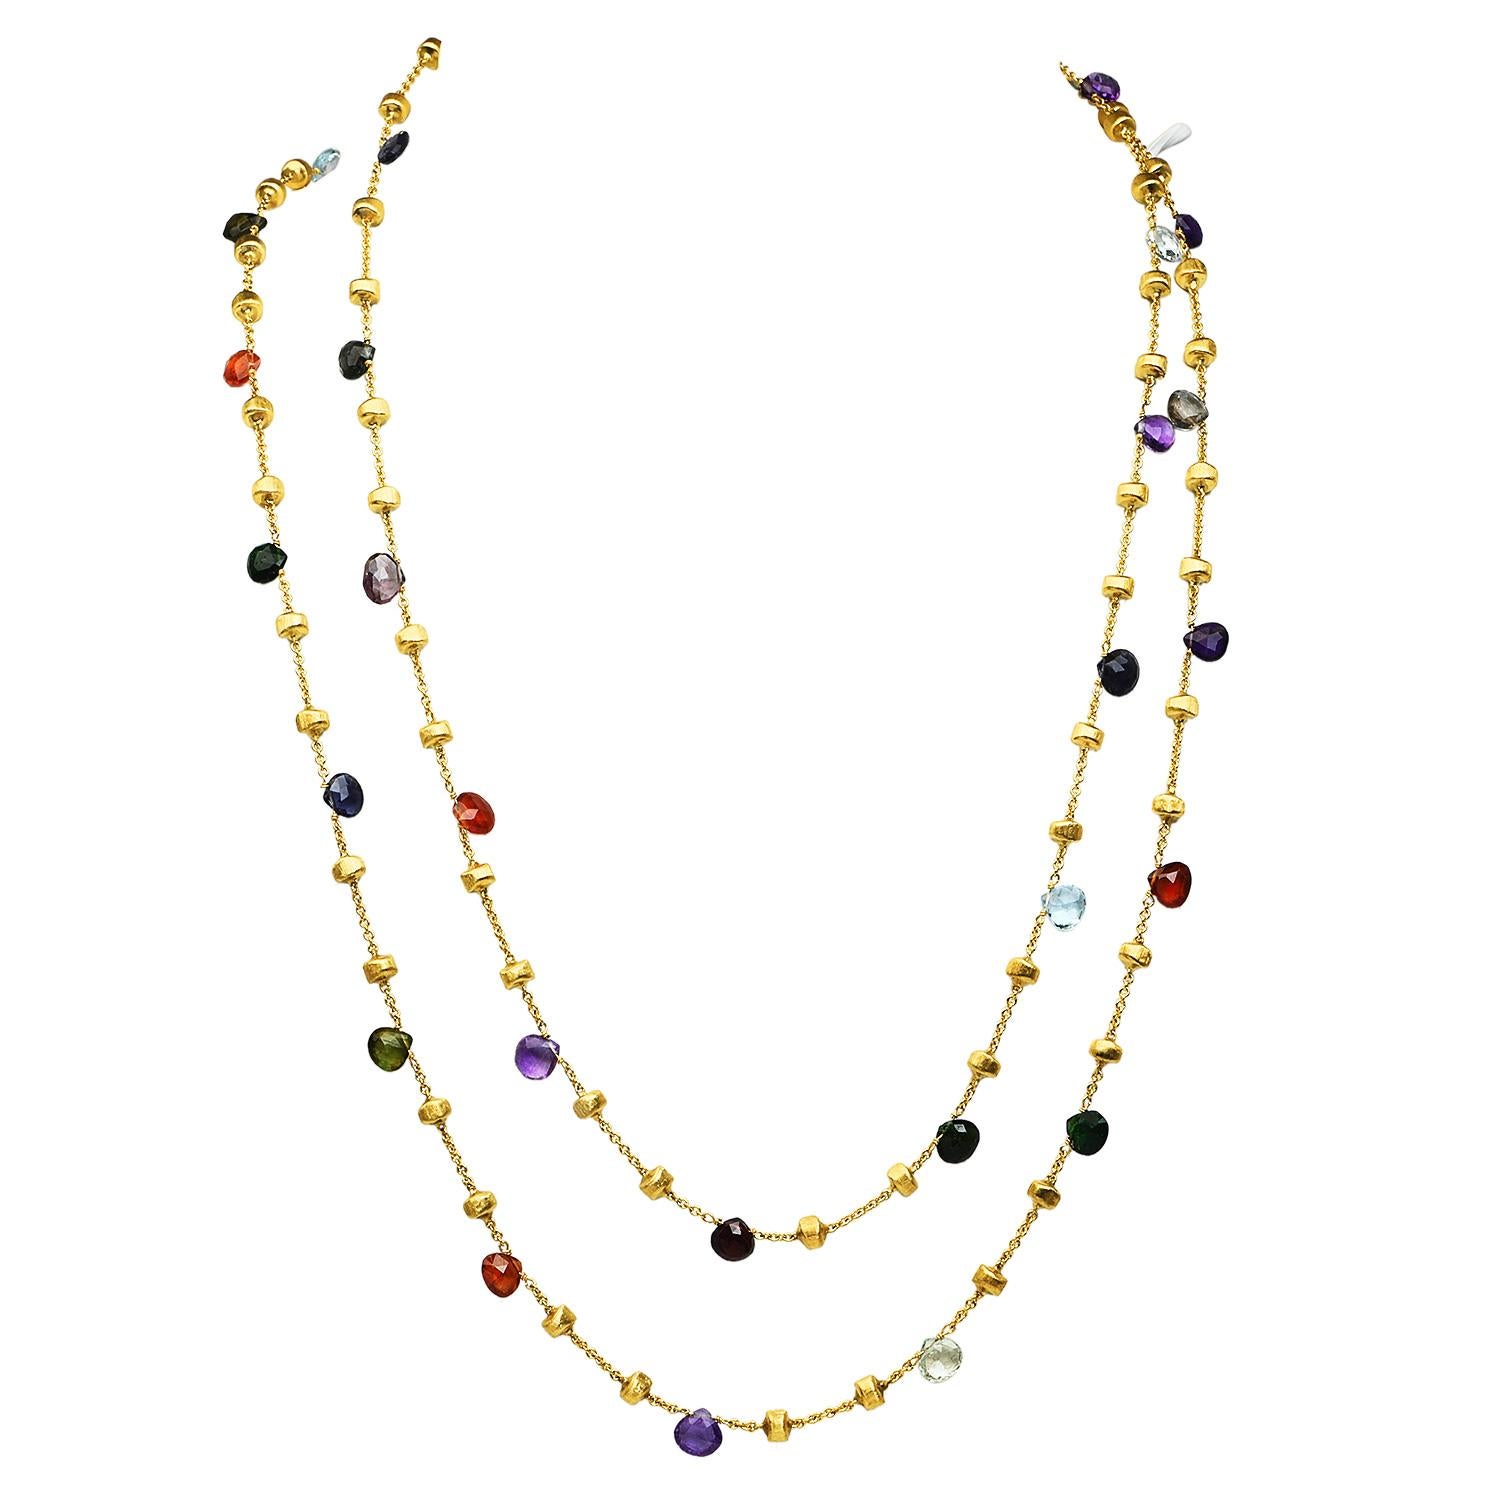 From the Italian designer, Marco Bicego, a happy and playful design.

This exquisite necklace is crafted from his Paradise collection in solid 18K yellow gold, with textured beaded accents. This edition is 46